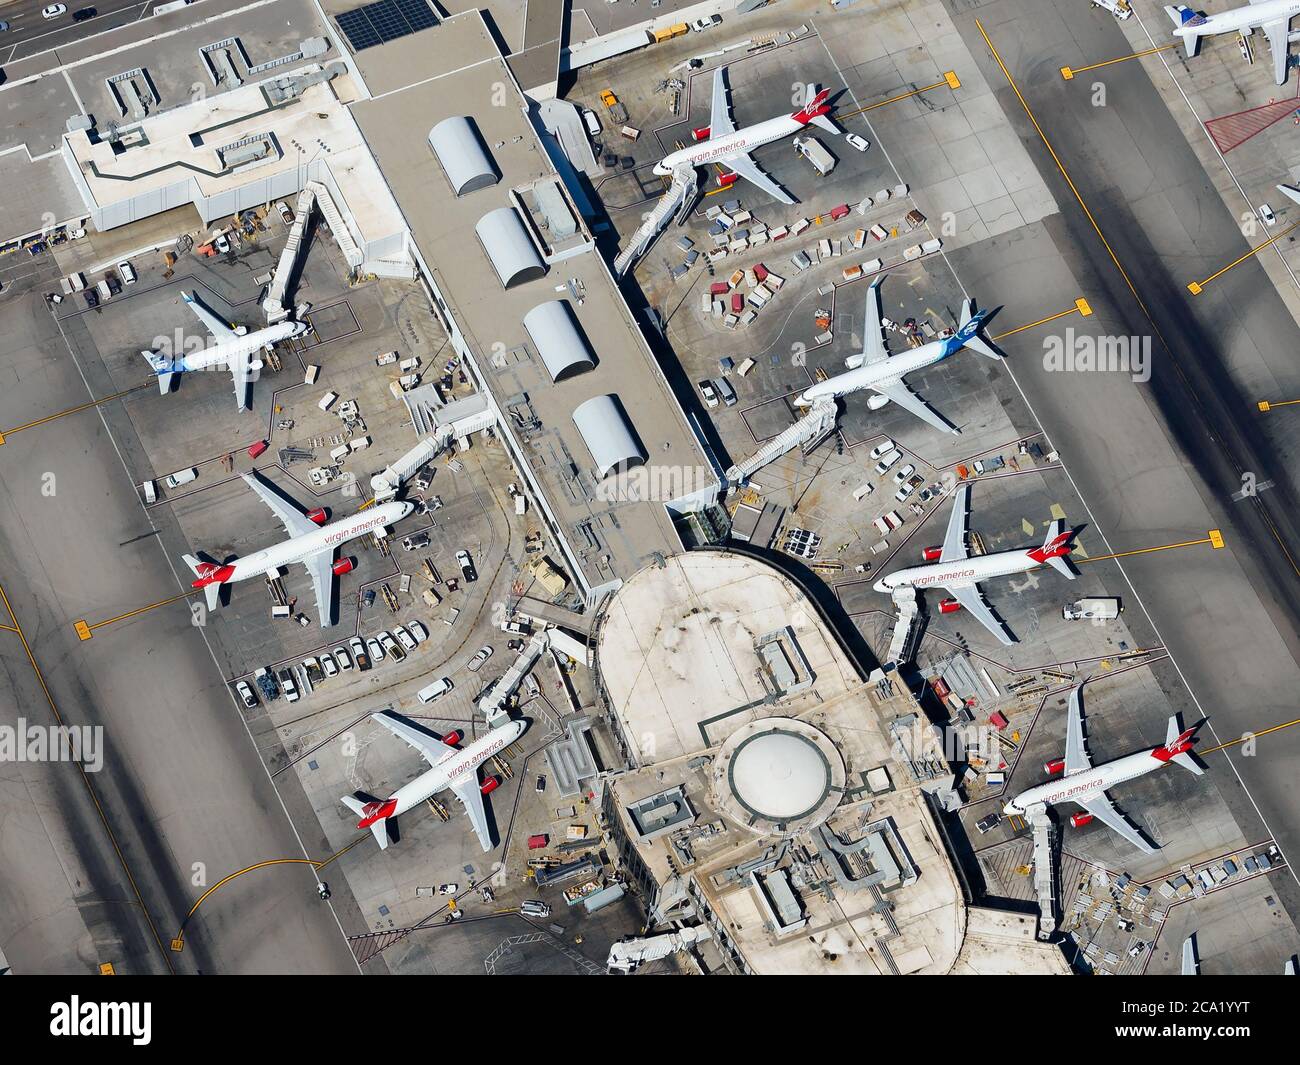 Los Angeles International Airport Terminal 6 aerial view. Passengers Terminal used by Alaska Airlines and Virgin America, airlines that merged. Stock Photo